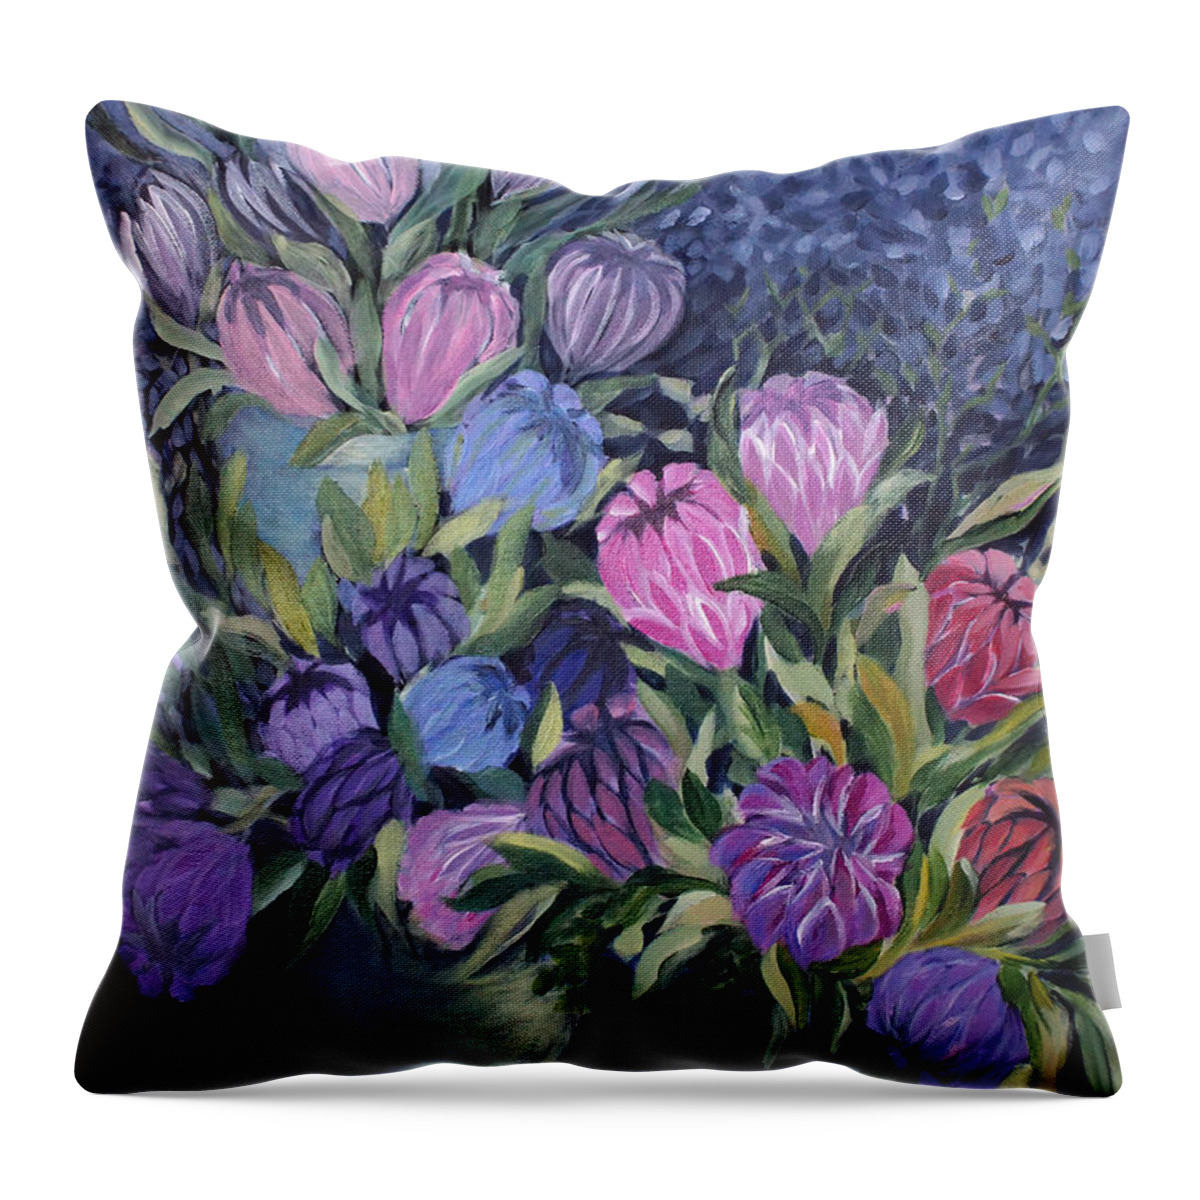 Floral Throw Pillow featuring the painting Palm Springs Market Favorites by Jo Smoley